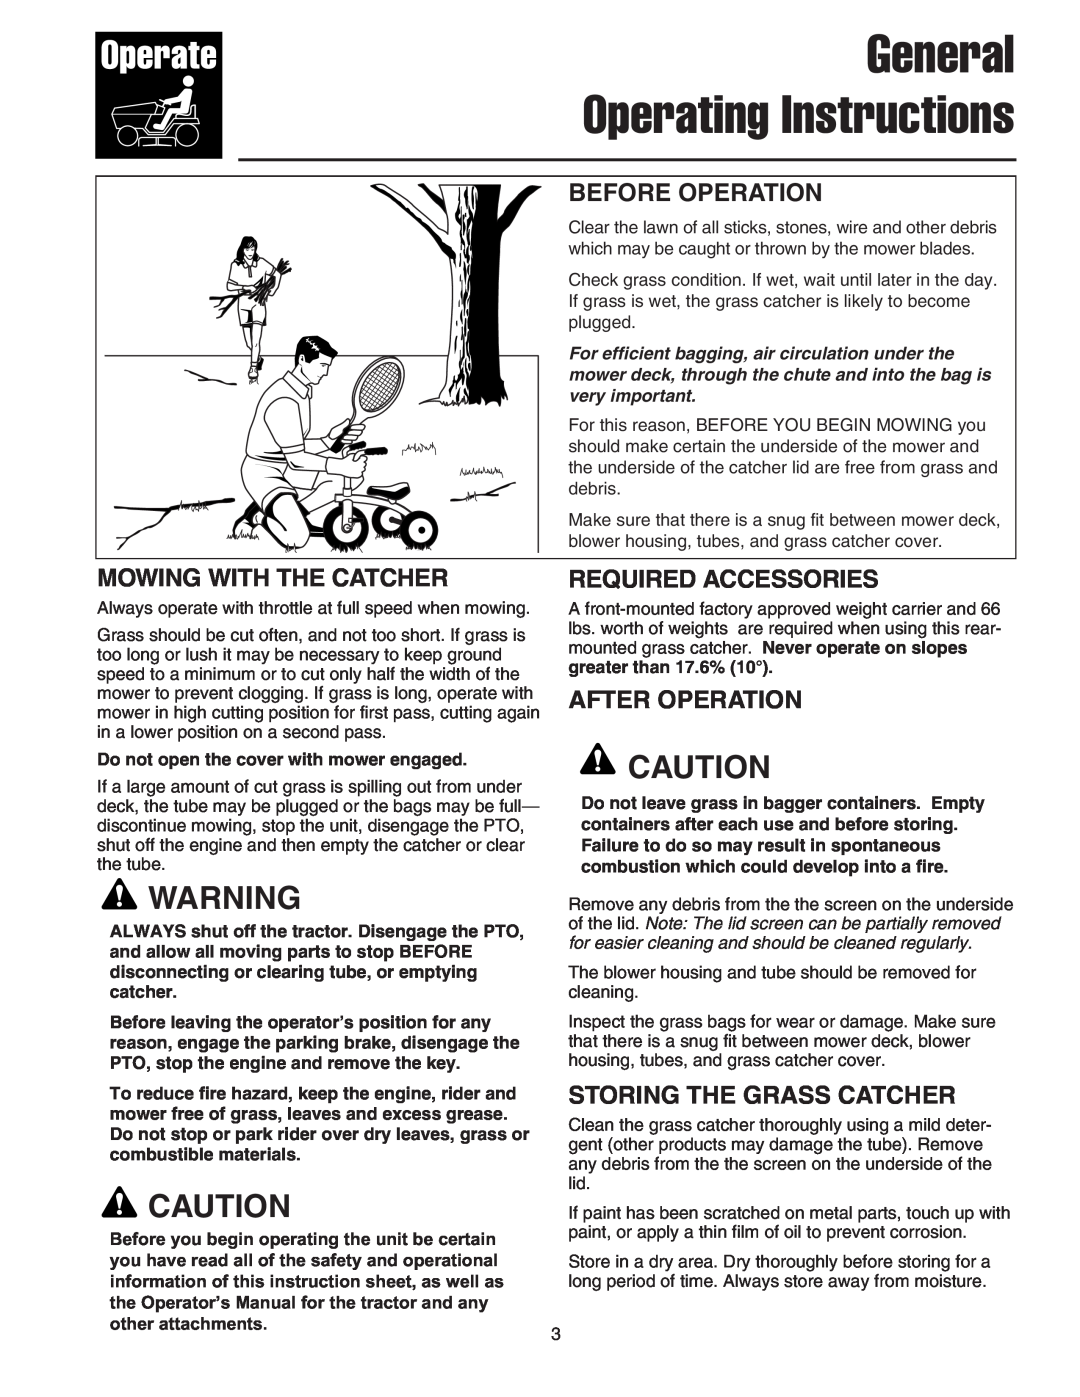 Snapper 1695064 manual General Operating Instructions, Before Operation, Mowing With The Catcher, Required Accessories 